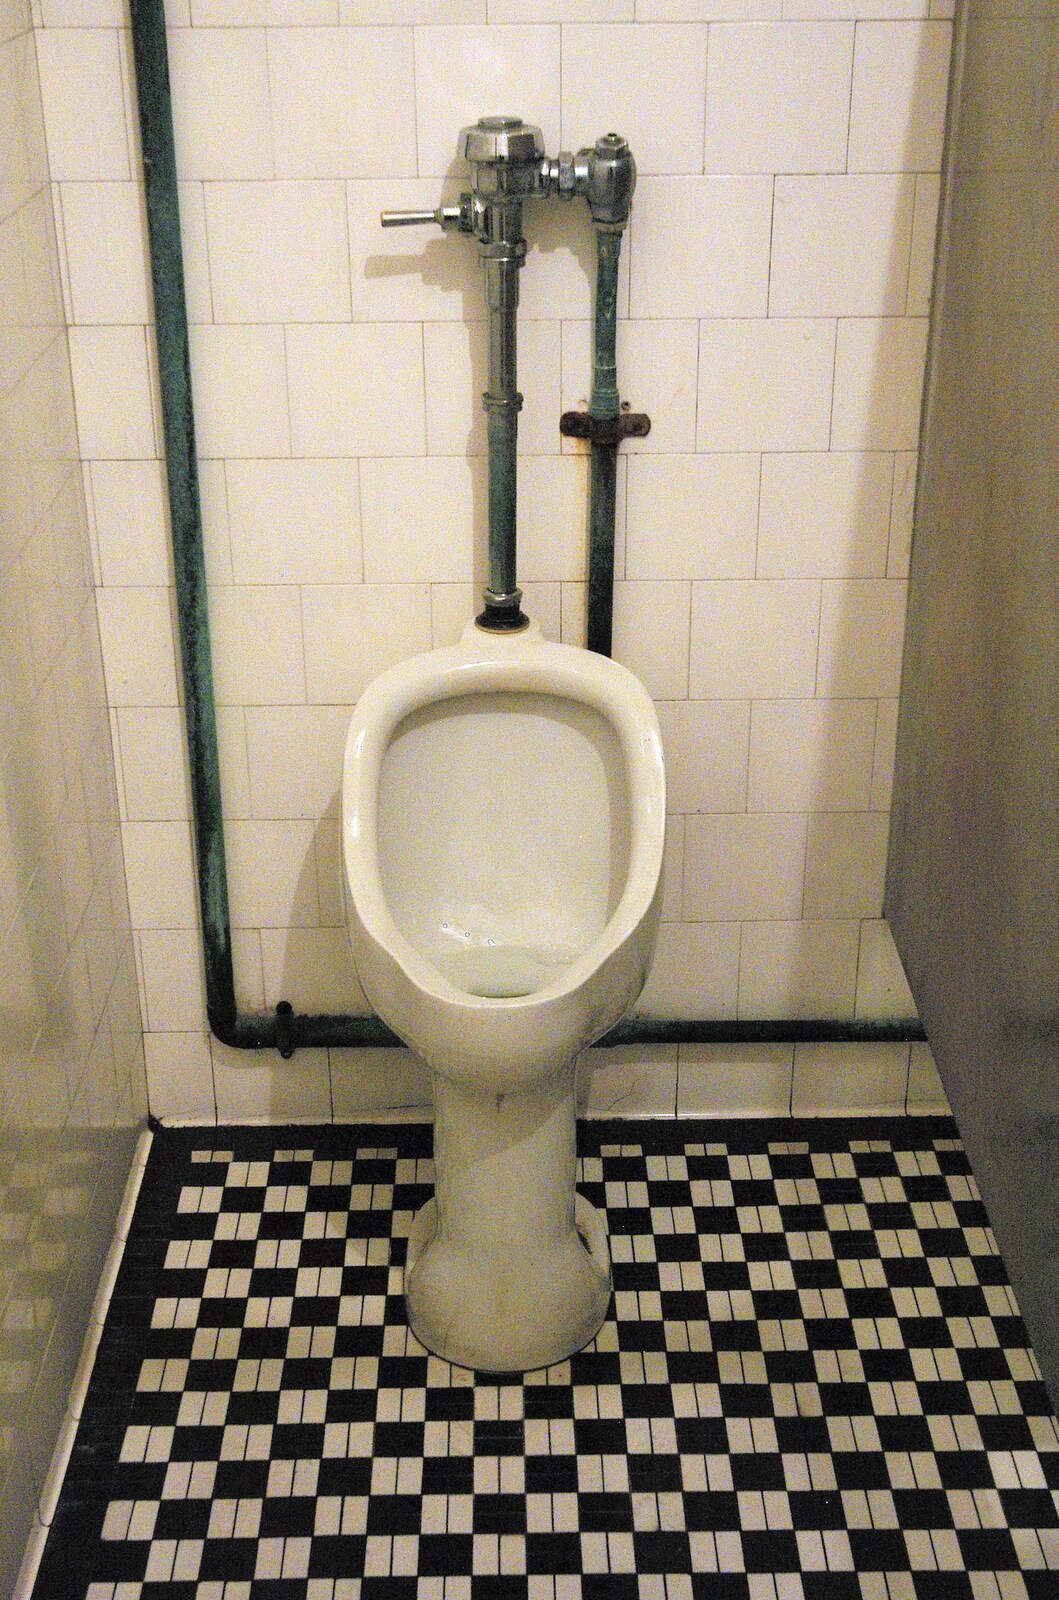 Funky urinal in a tiled cubicle from Chinatown, Telegraph Hill and Fisherman's Wharf, San Francisco, California, US - 11th March 2006